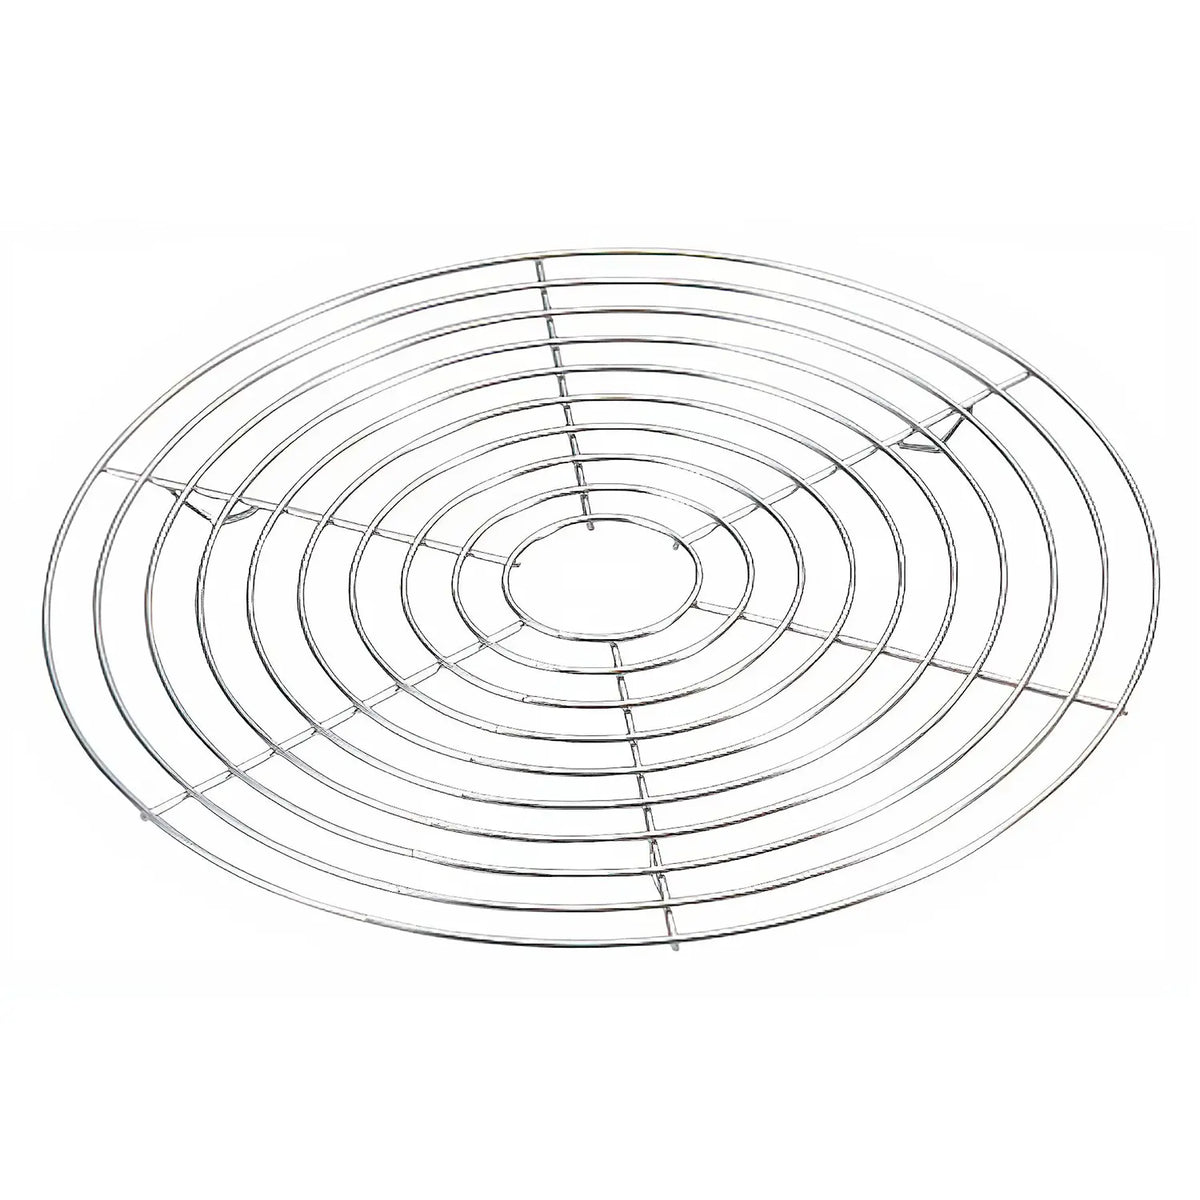 EBM Stainless Steel Round Cake Cooling Rack with Feet